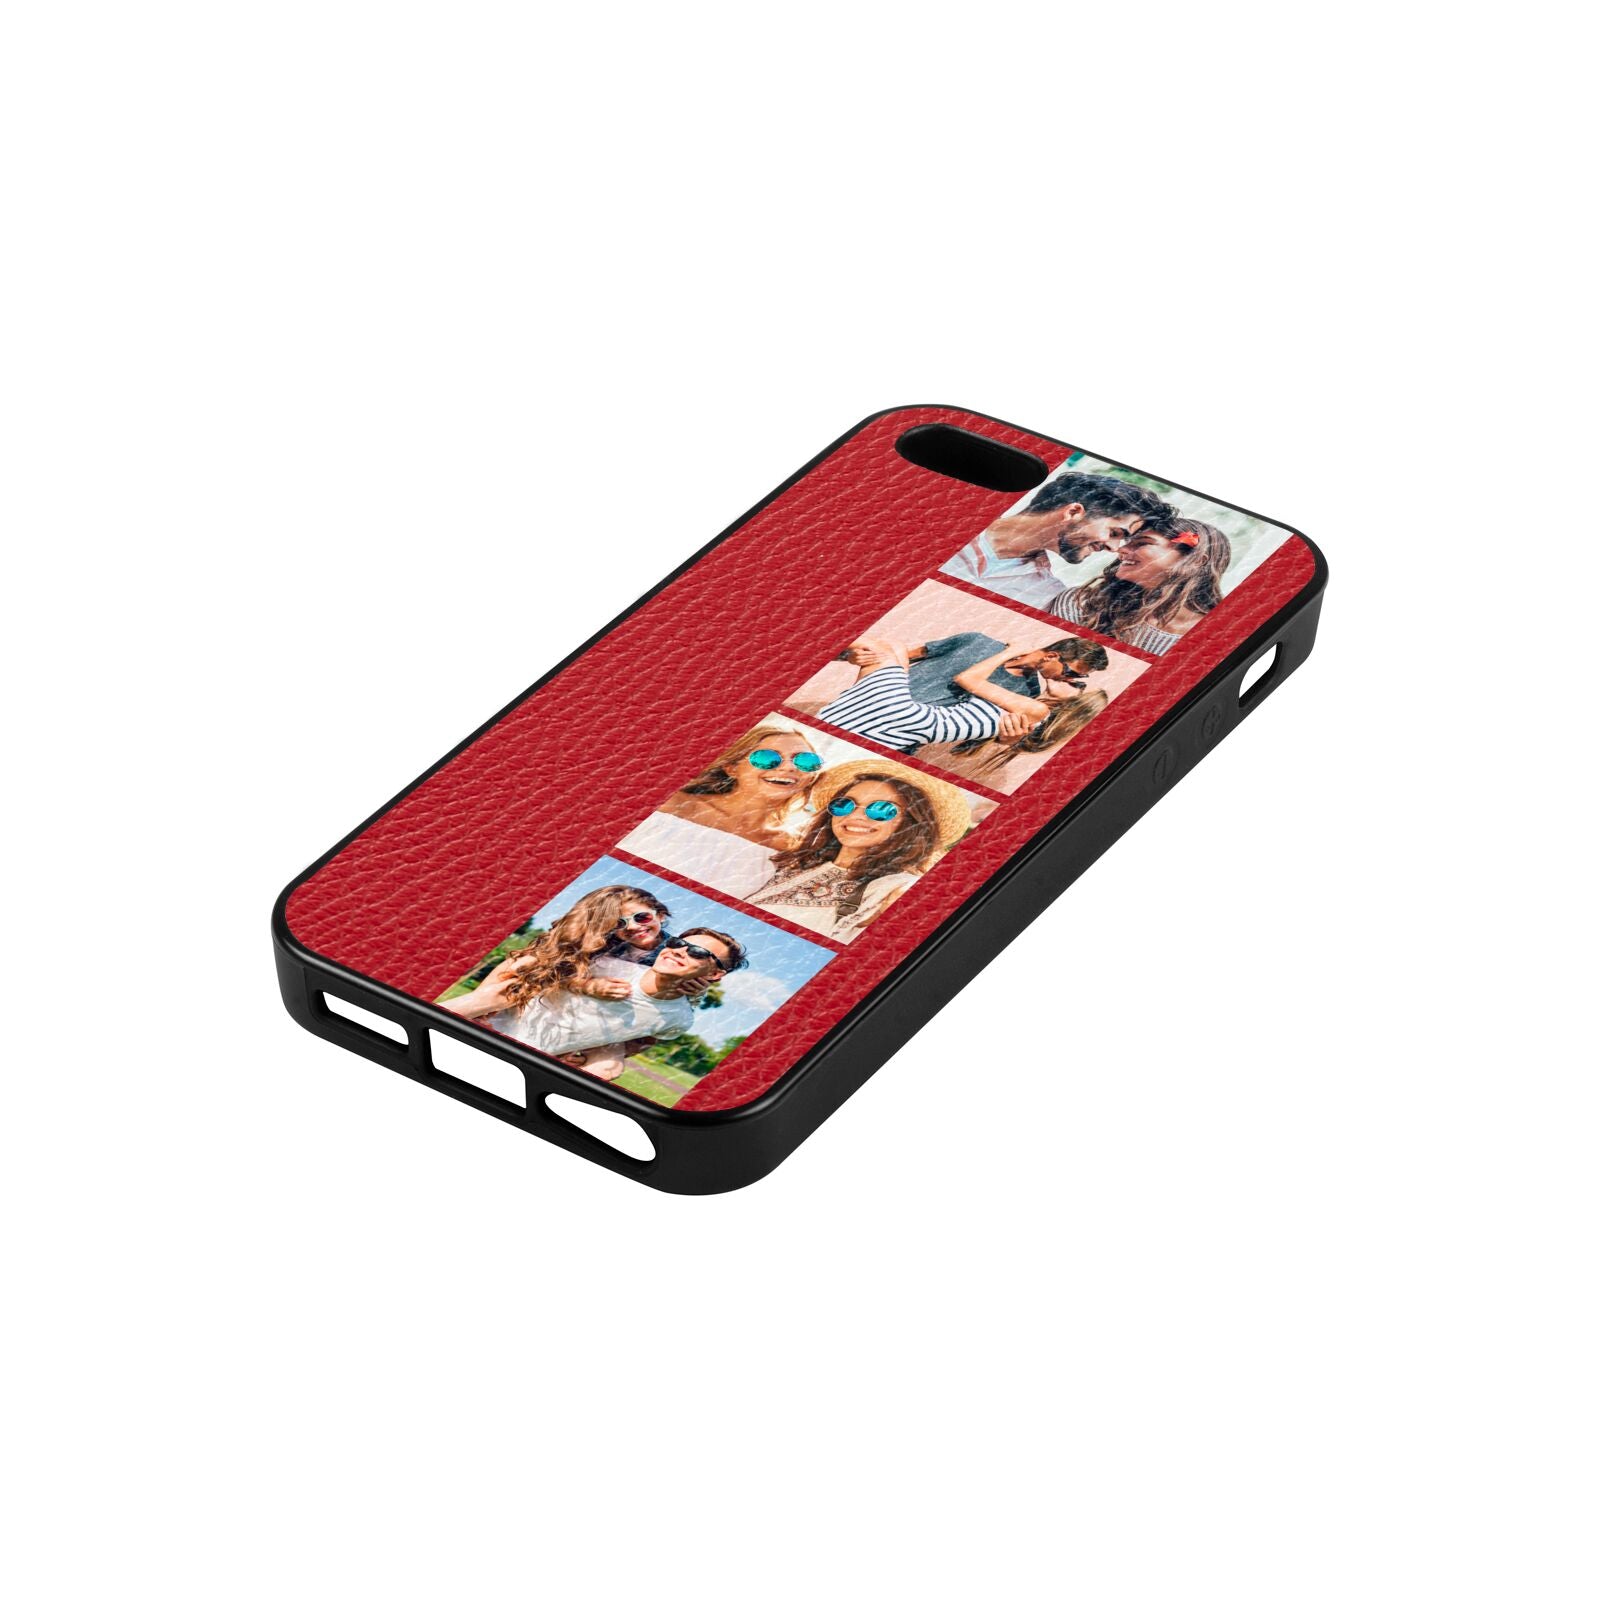 Photo Strip Montage Upload Red Pebble Leather iPhone 5 Case Side Angle